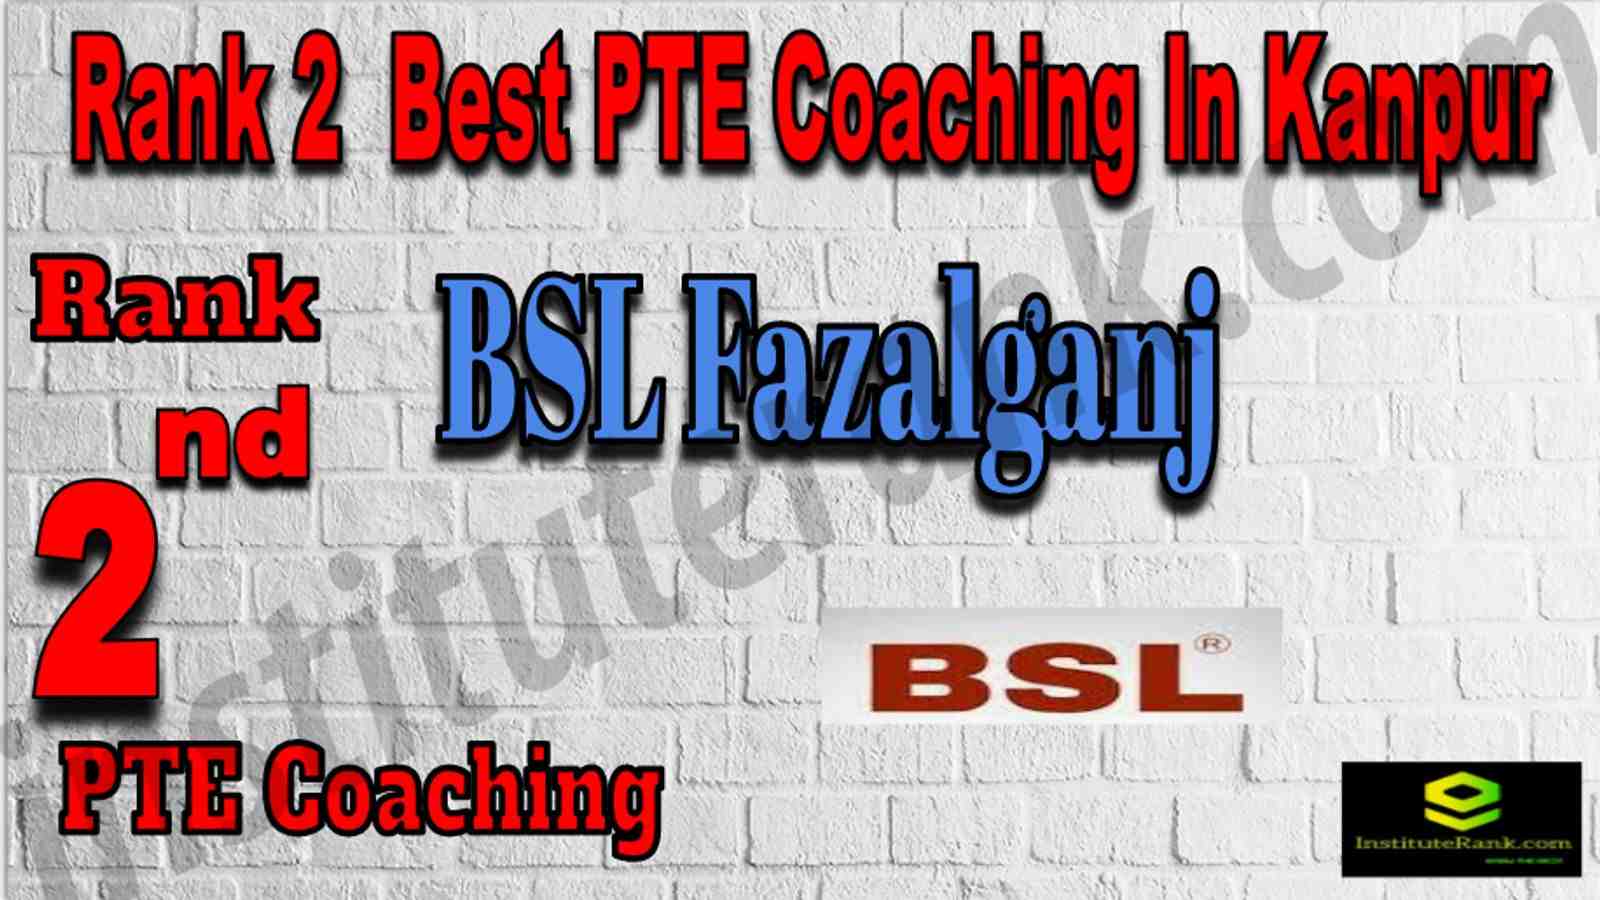 Rank 2 Best PTE Coaching In Kanpur